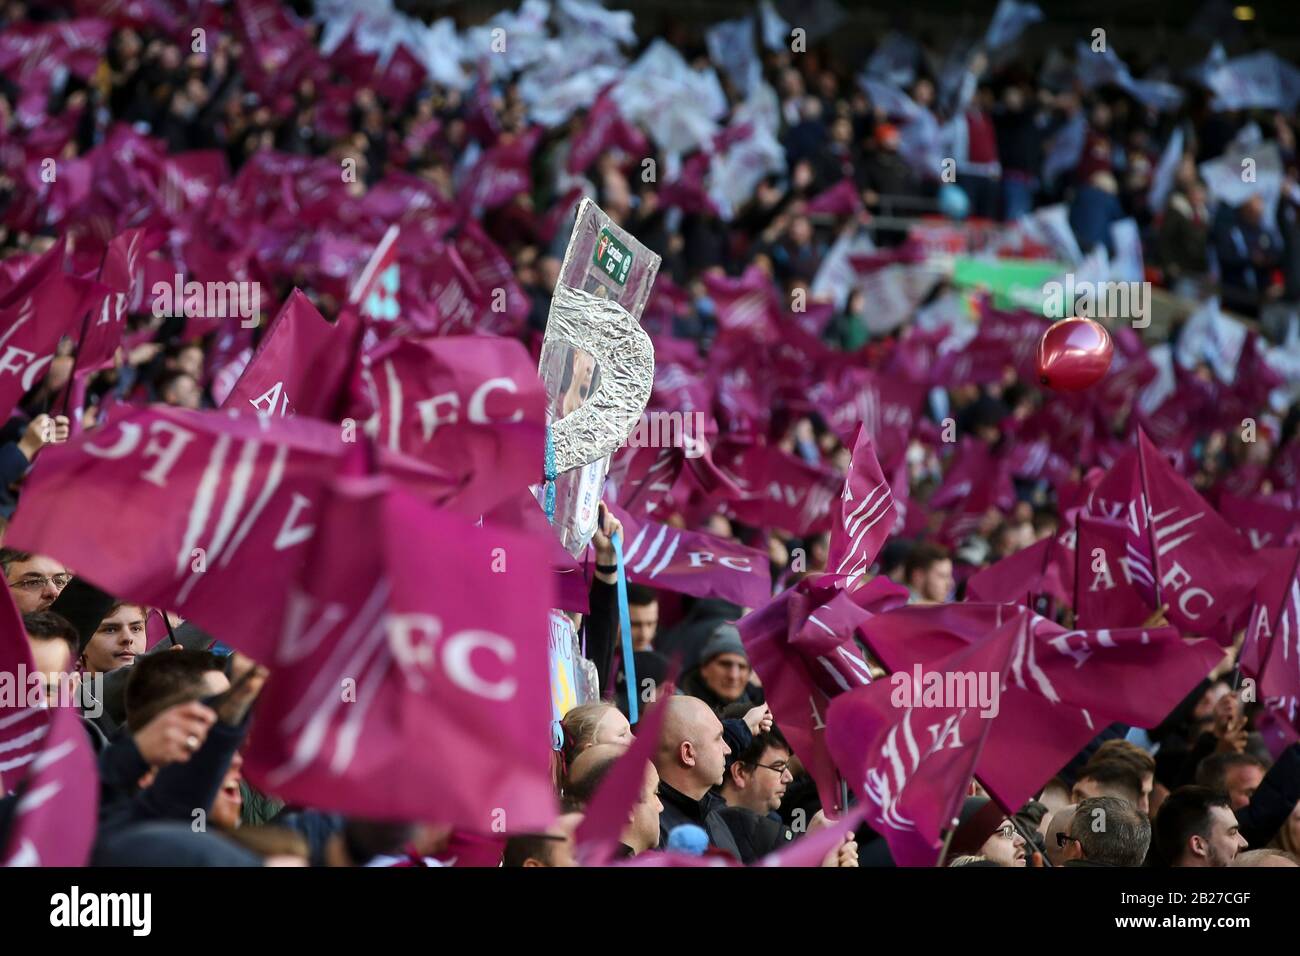 London, UK. 01st Mar, 2020. A general view of Aston Villa fans before the Carabao Cup Final match between Aston Villa and Manchester City at Wembley Stadium on March 1st 2020 in London, England. (Photo by Paul Chesterton/phcimages.com) Credit: PHC Images/Alamy Live News Stock Photo